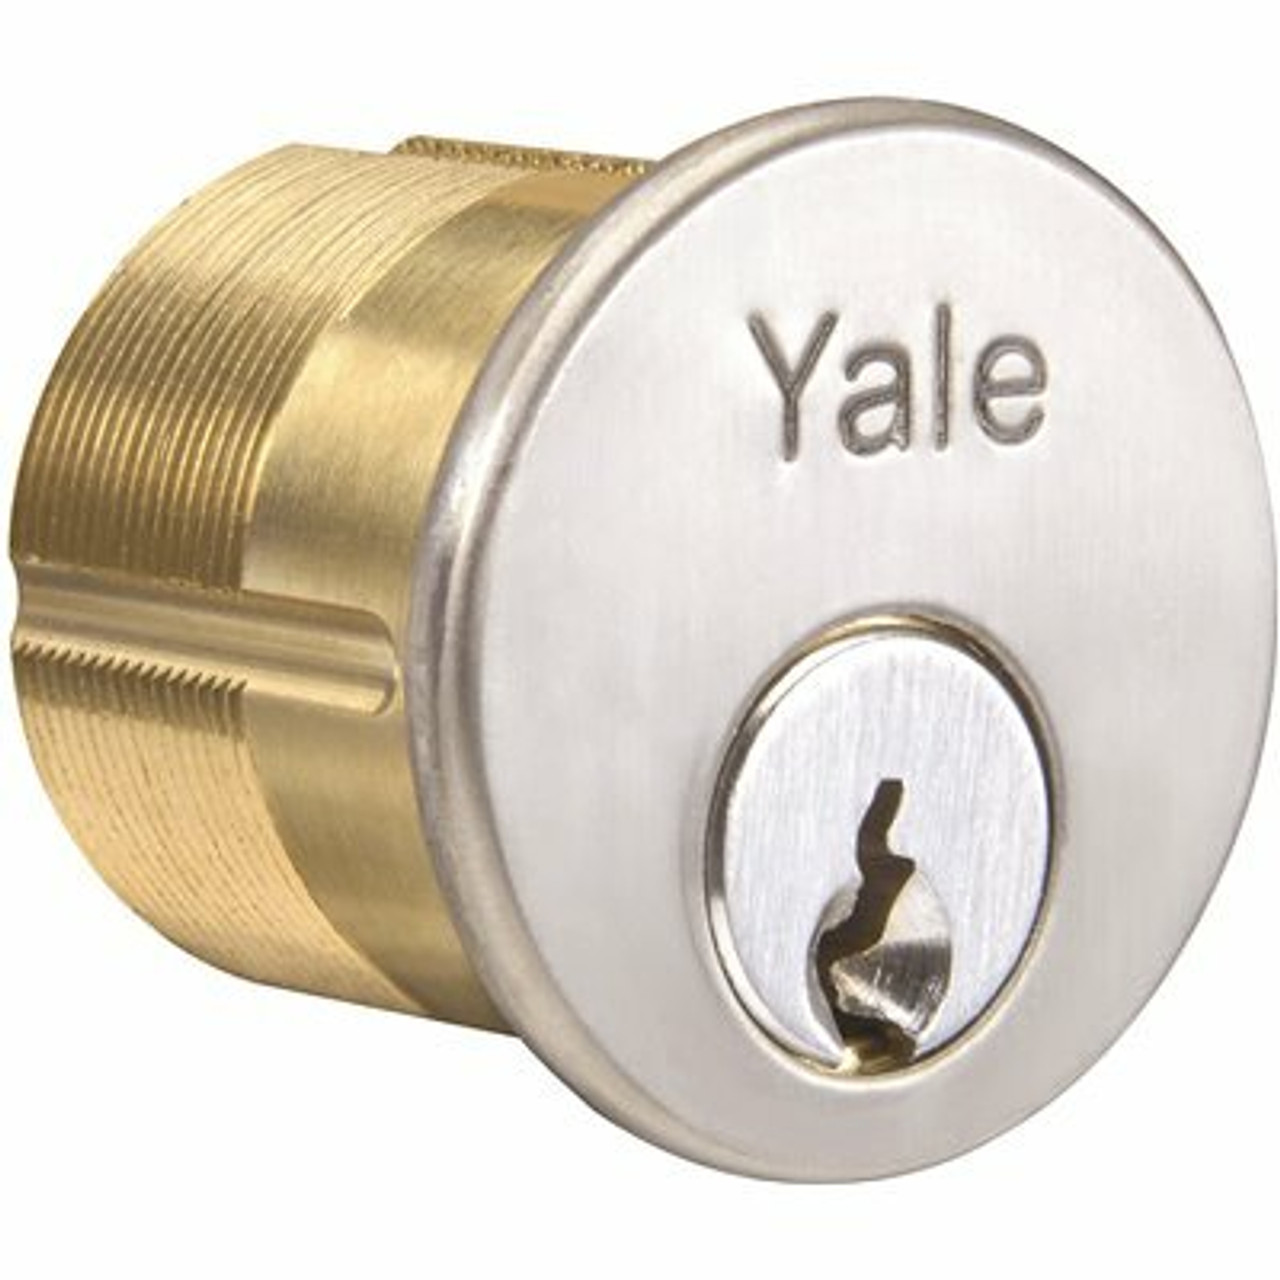 Yale Commercial Locks And Hardware 1-1/8 In. Satin Chrome Keyway Mortise Cylinder